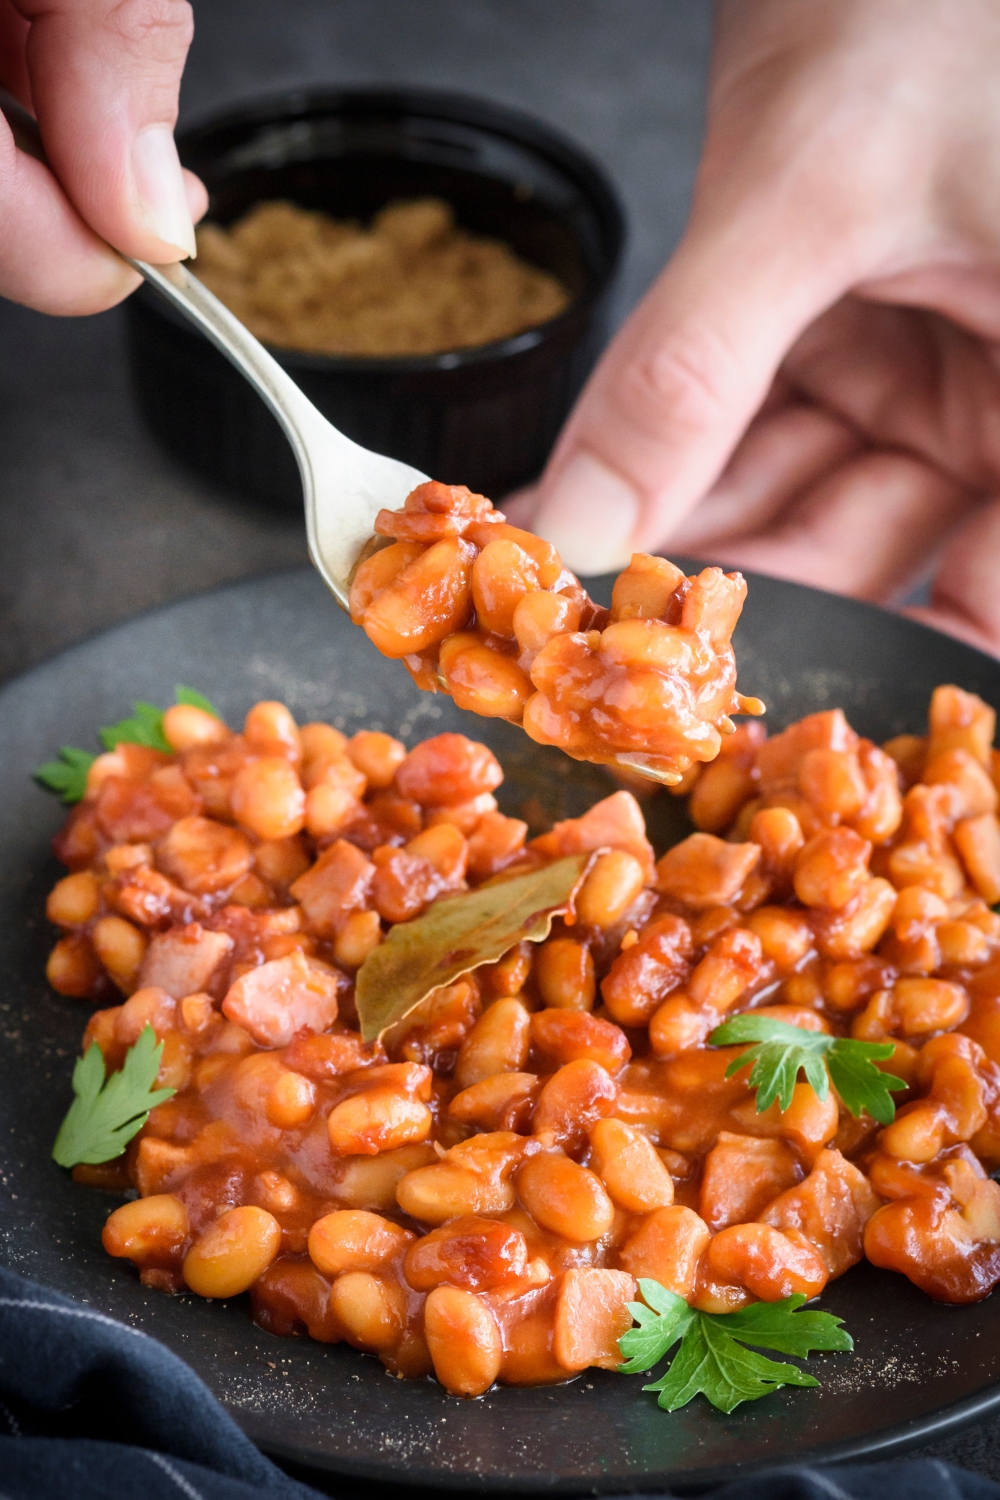 A fork full of baked beans over a plate